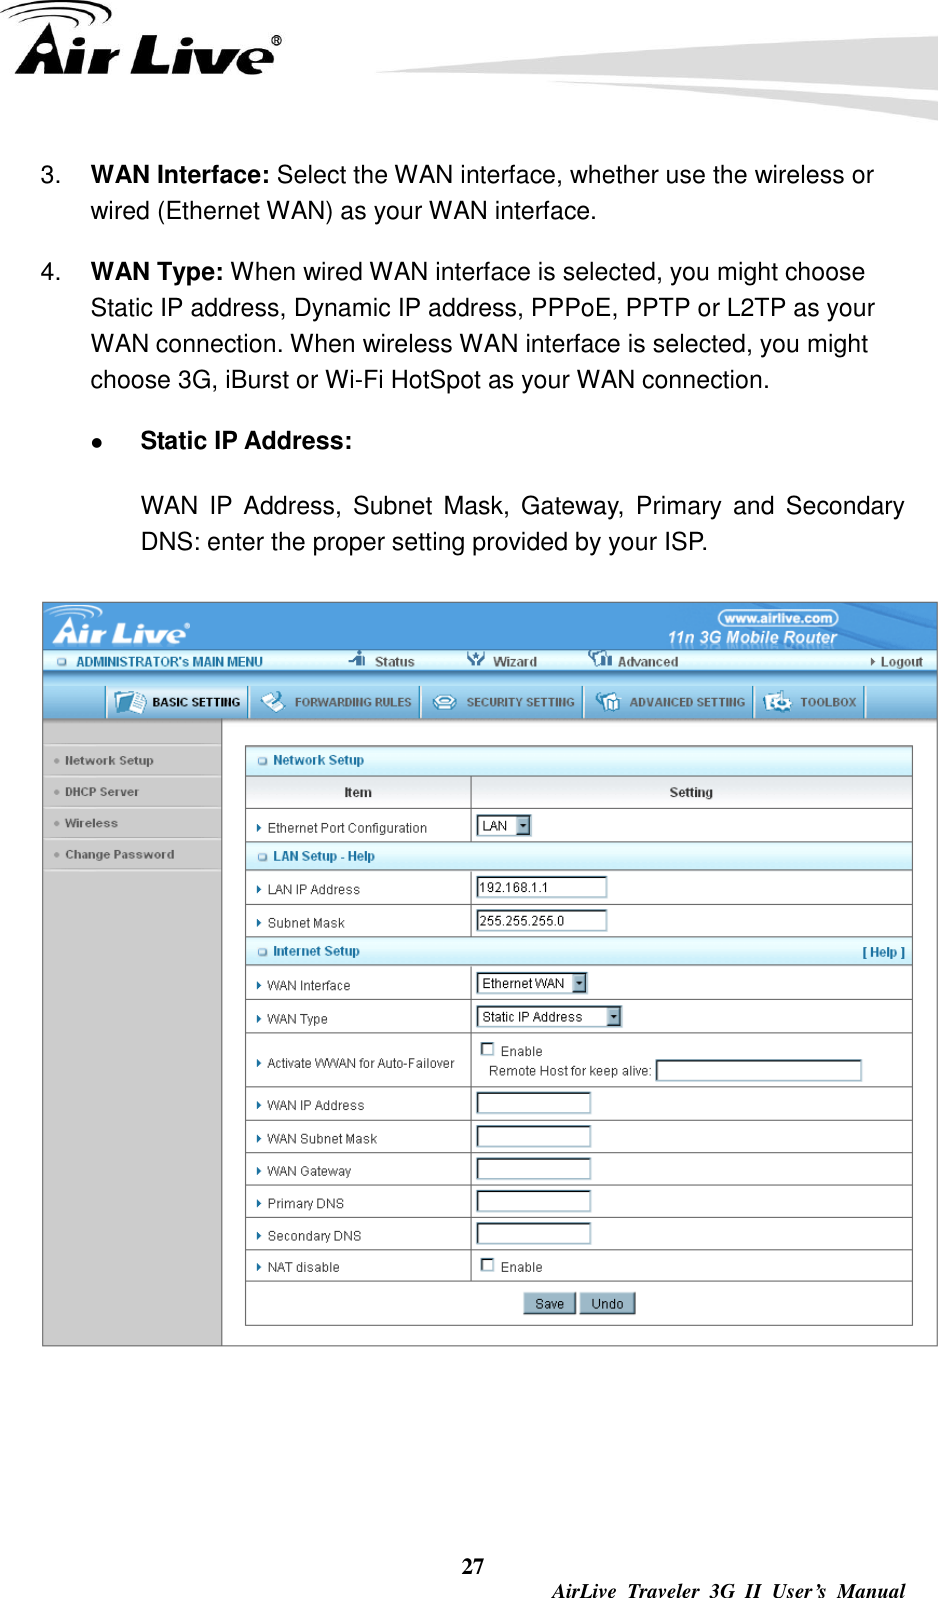  27  AirLive  Traveler  3G  II  User’s  Manual 3. WAN Interface: Select the WAN interface, whether use the wireless or wired (Ethernet WAN) as your WAN interface.   4. WAN Type: When wired WAN interface is selected, you might choose Static IP address, Dynamic IP address, PPPoE, PPTP or L2TP as your WAN connection. When wireless WAN interface is selected, you might choose 3G, iBurst or Wi-Fi HotSpot as your WAN connection.    Static IP Address: WAN  IP  Address,  Subnet  Mask,  Gateway,  Primary  and  Secondary DNS: enter the proper setting provided by your ISP.    